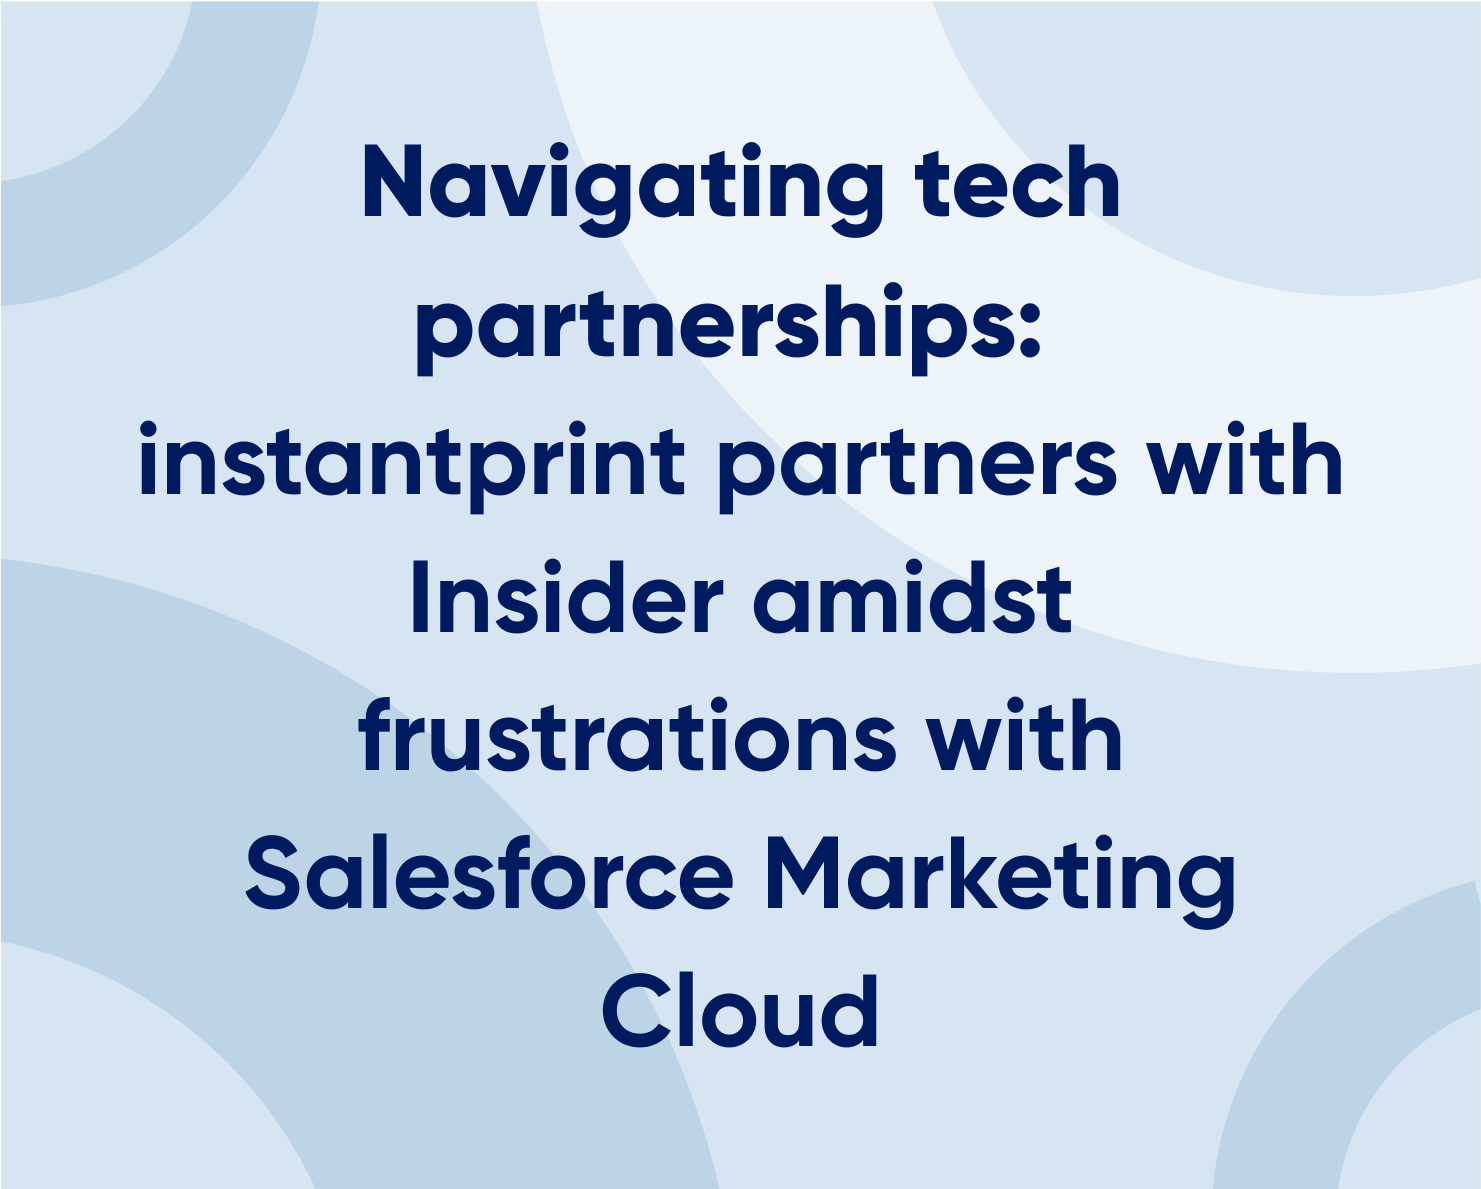 Navigating tech partnerships: instantprint partners with Insider amidst frustrations with Salesforce Marketing Cloud Featured Image